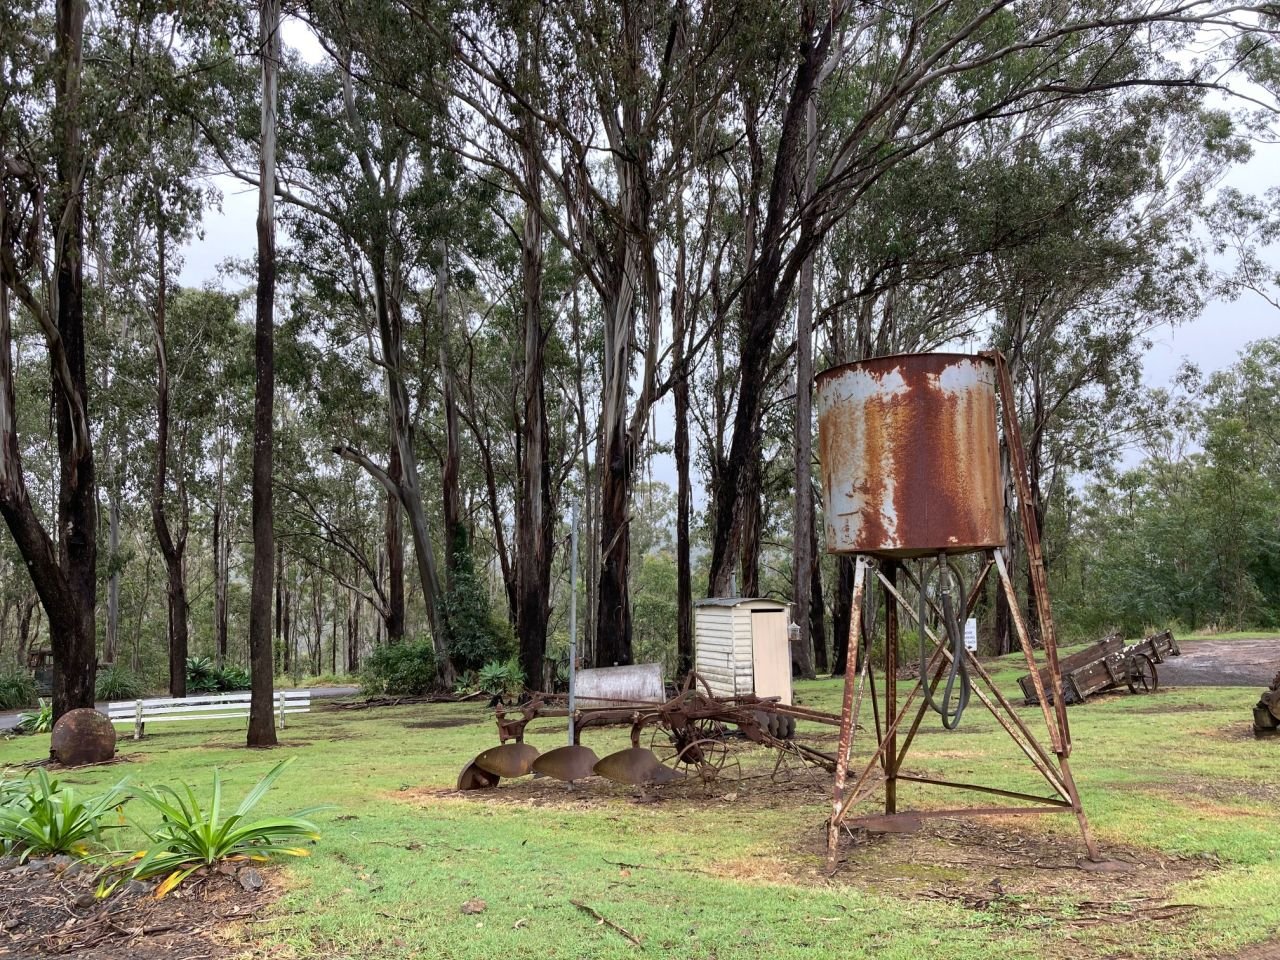 Members and guests visited the Rathlogan Olive Grove during a Scenic Rim bus trip in July 2022